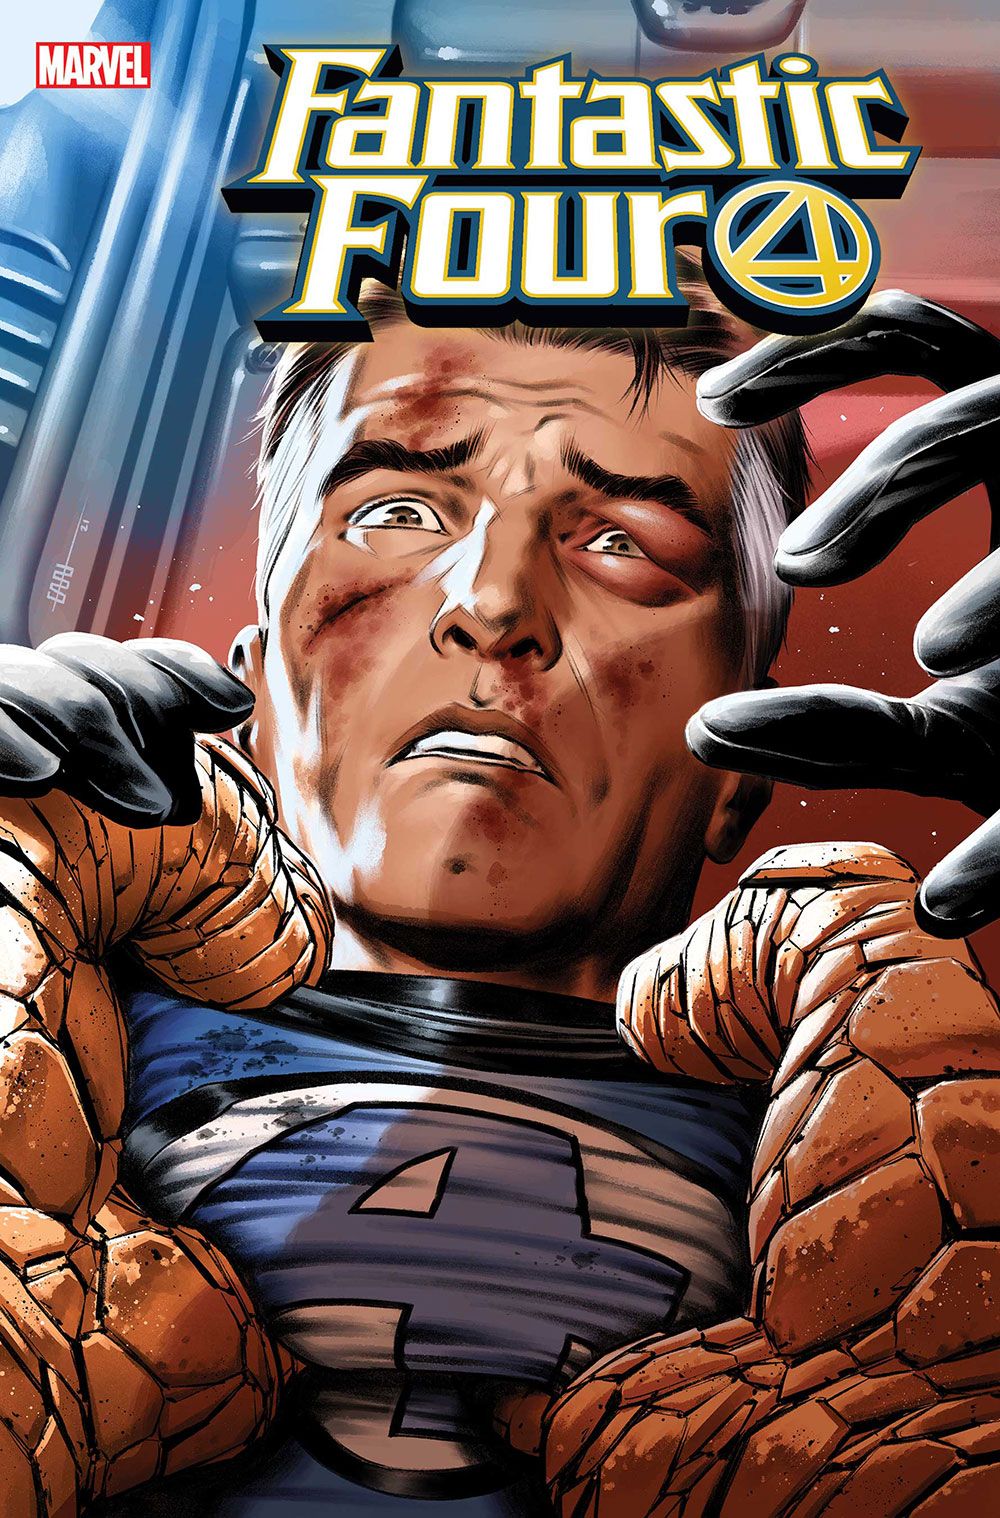 Ben Grimm (The Thing) grabs Reed Richards (Mr. Fantastic) on the cover for Fantastic Four #42.